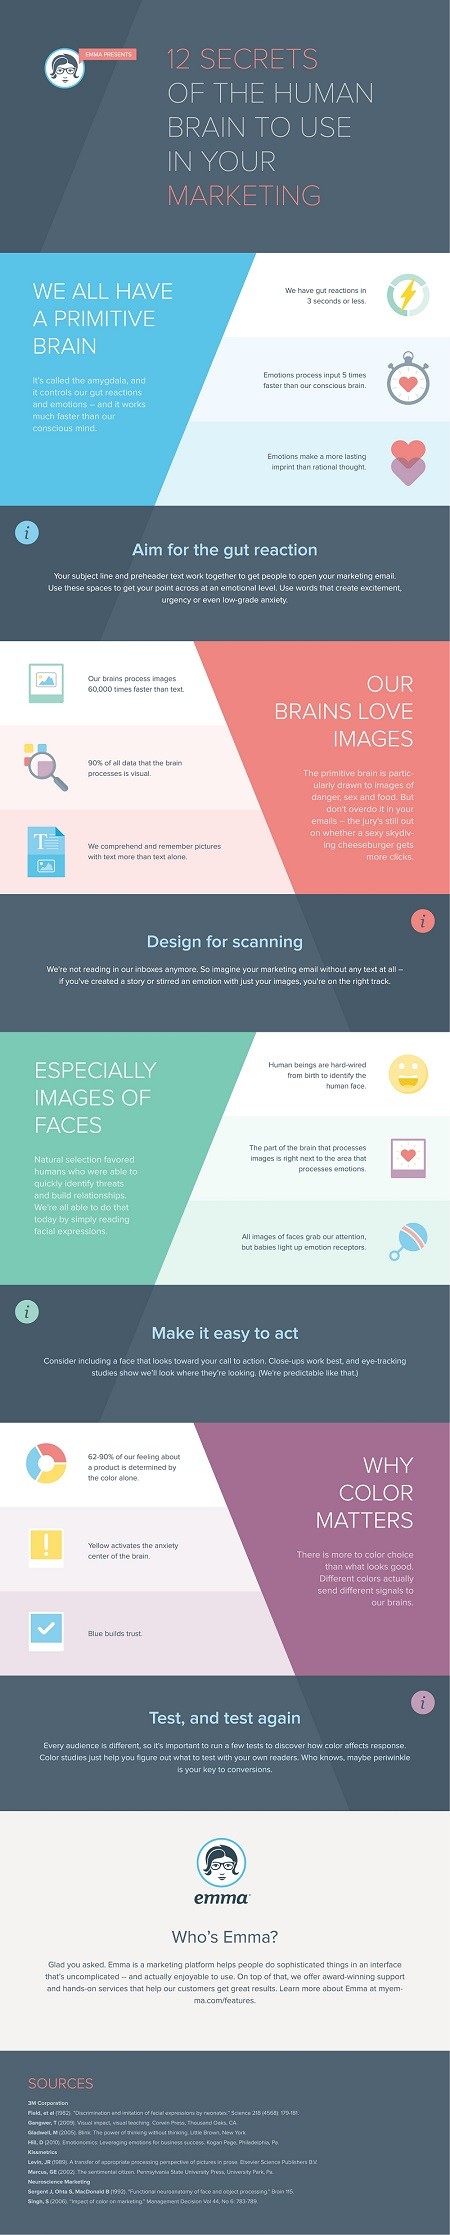 consumer-behaviour-the-psychology-of-marketing-infographic-image